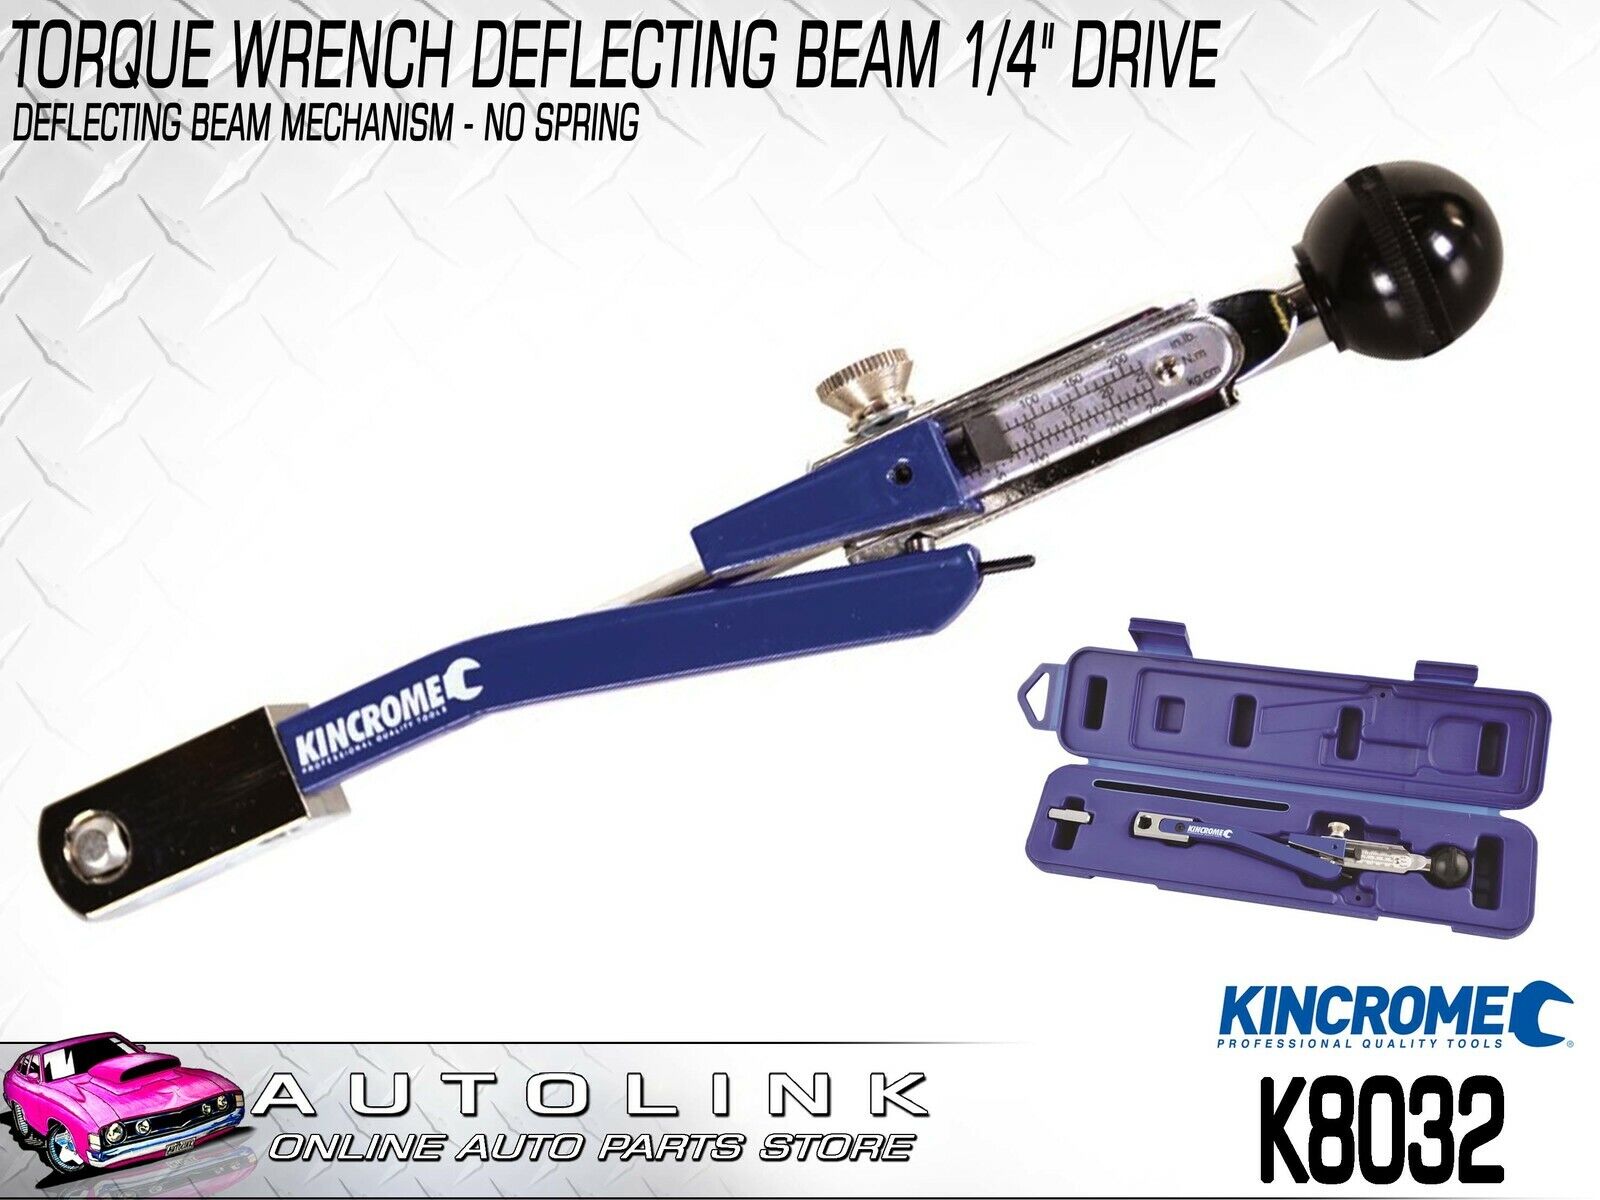 KINCROME TORQUE WRENCH DEFLECTING BEAM 1/4" DRIVE 50-200 IN/LB 5-25NM K8032